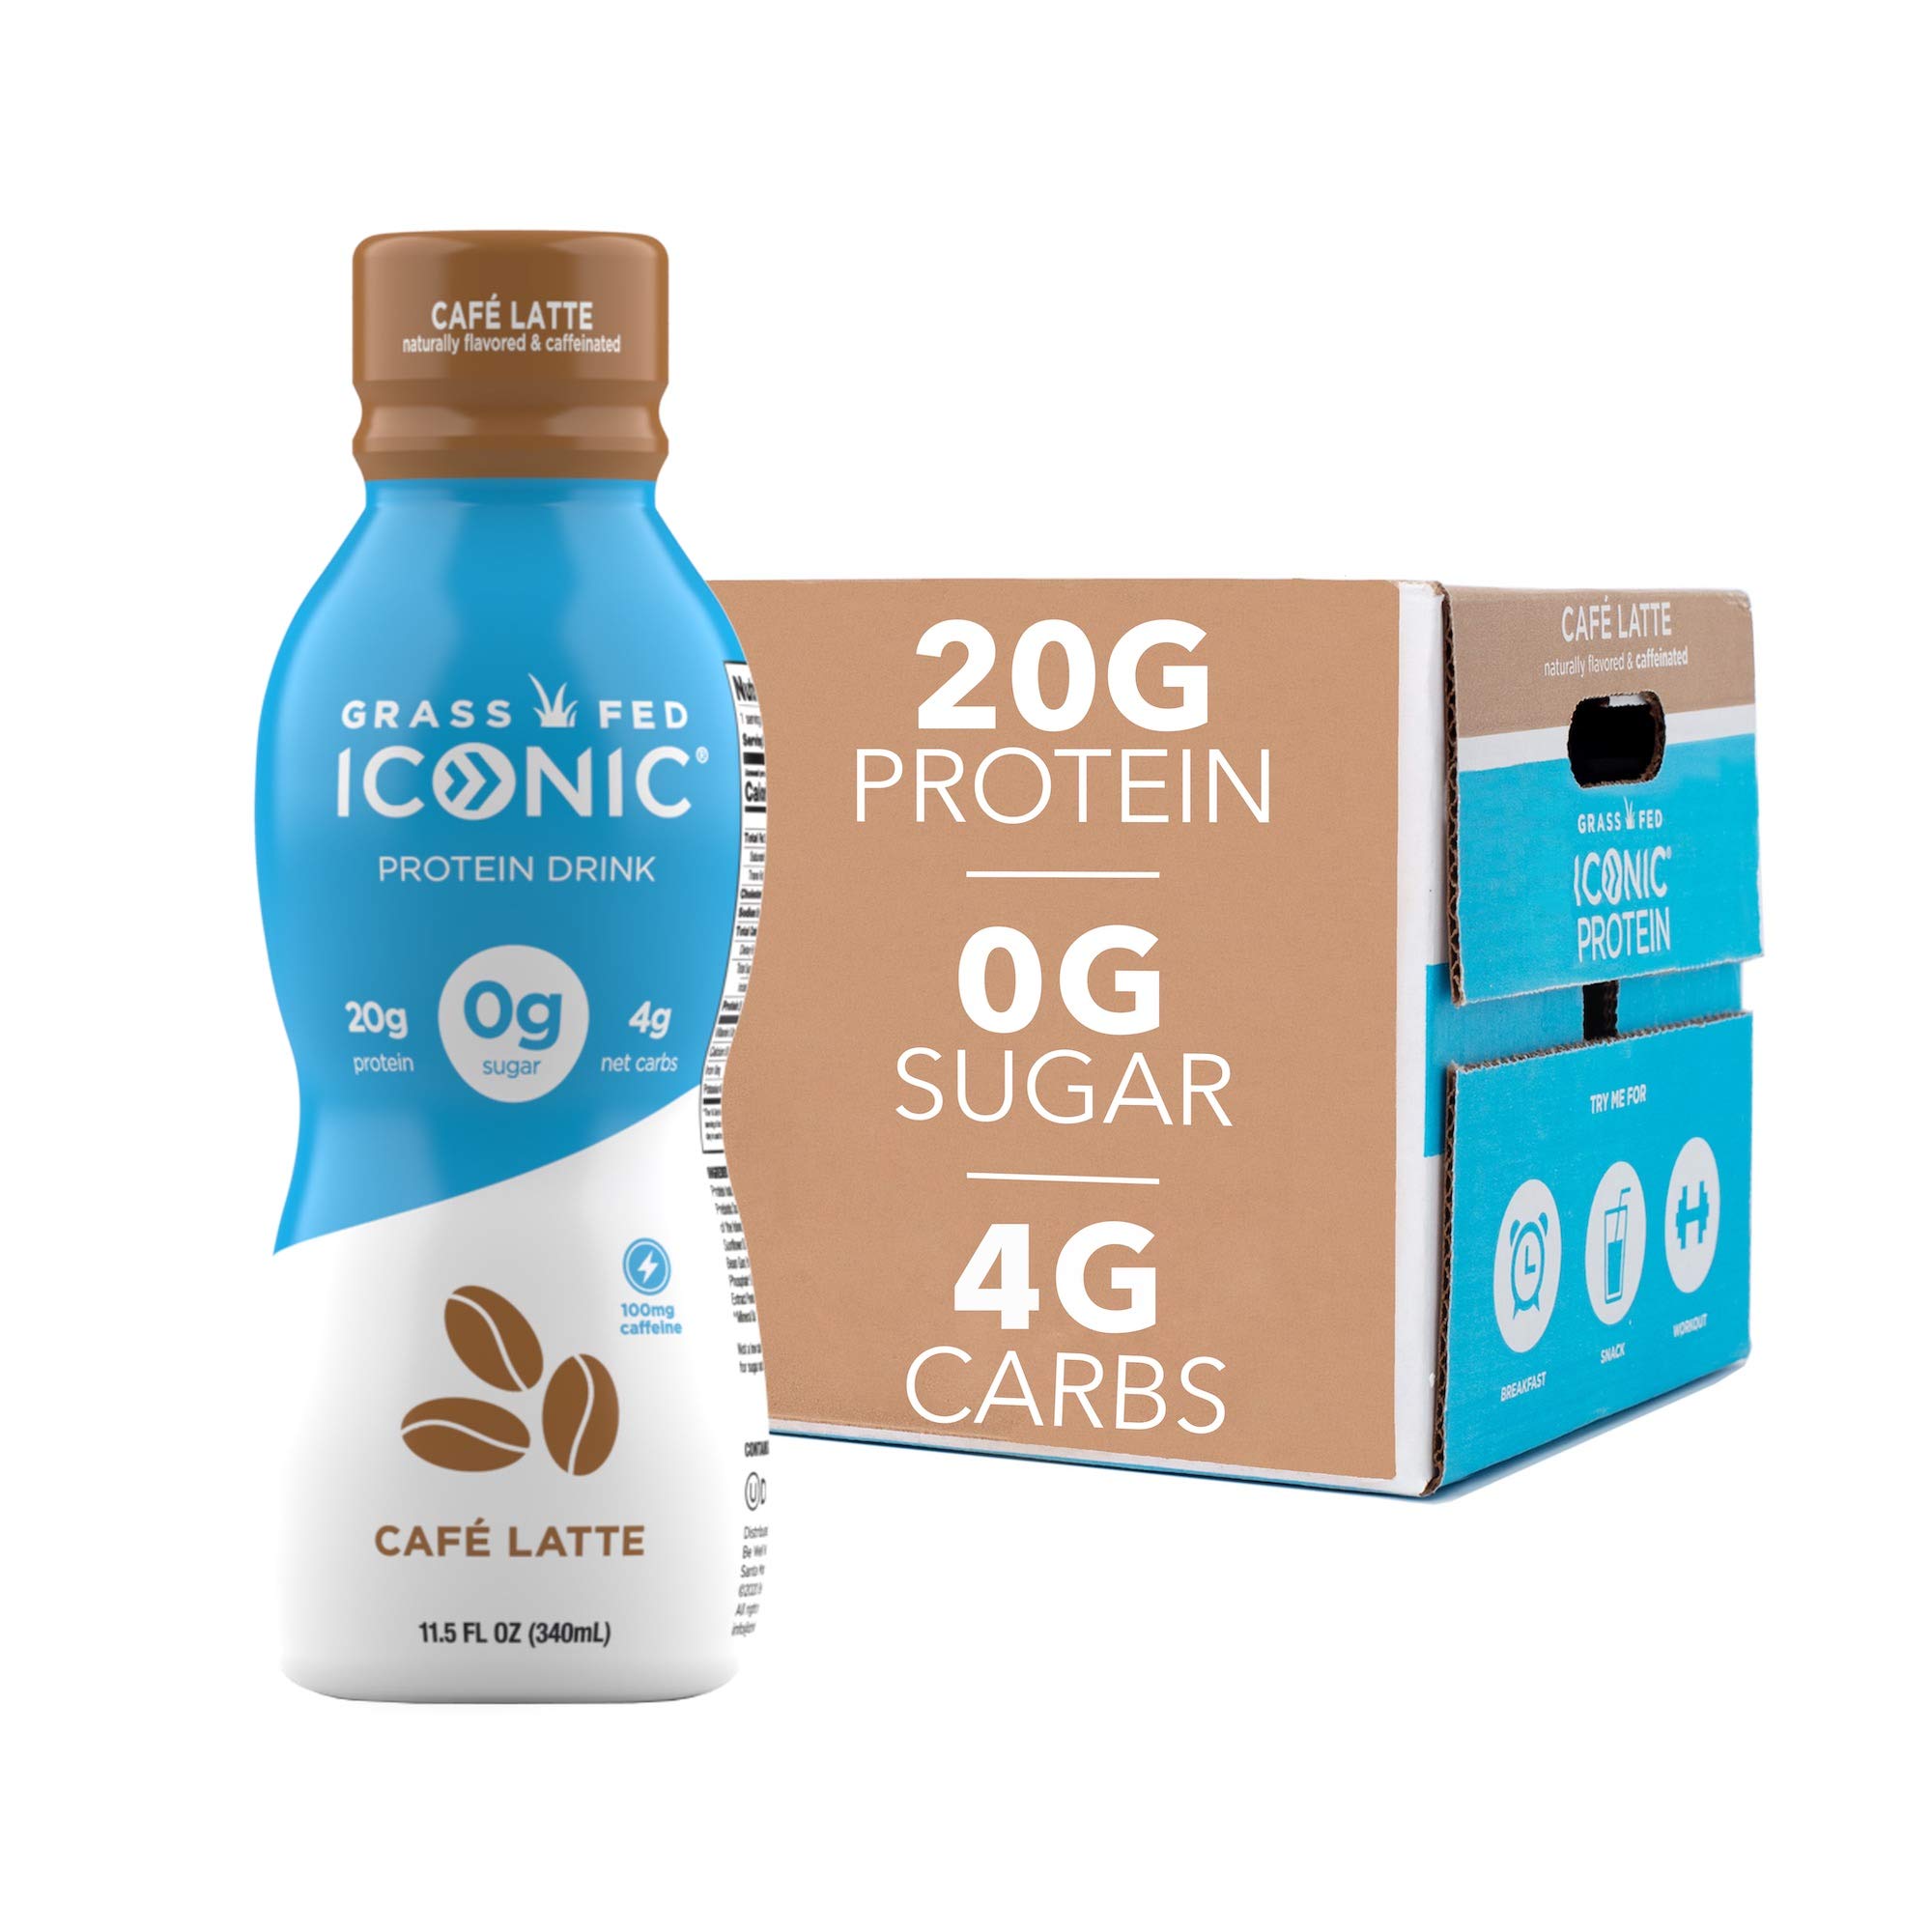 Iconic Protein Drinks, Sample Pack (4 Flavors) - Low Carb Protein Shakes -  Lactose-Free, Gluten-Free, Protein Drink - Keto Friendly